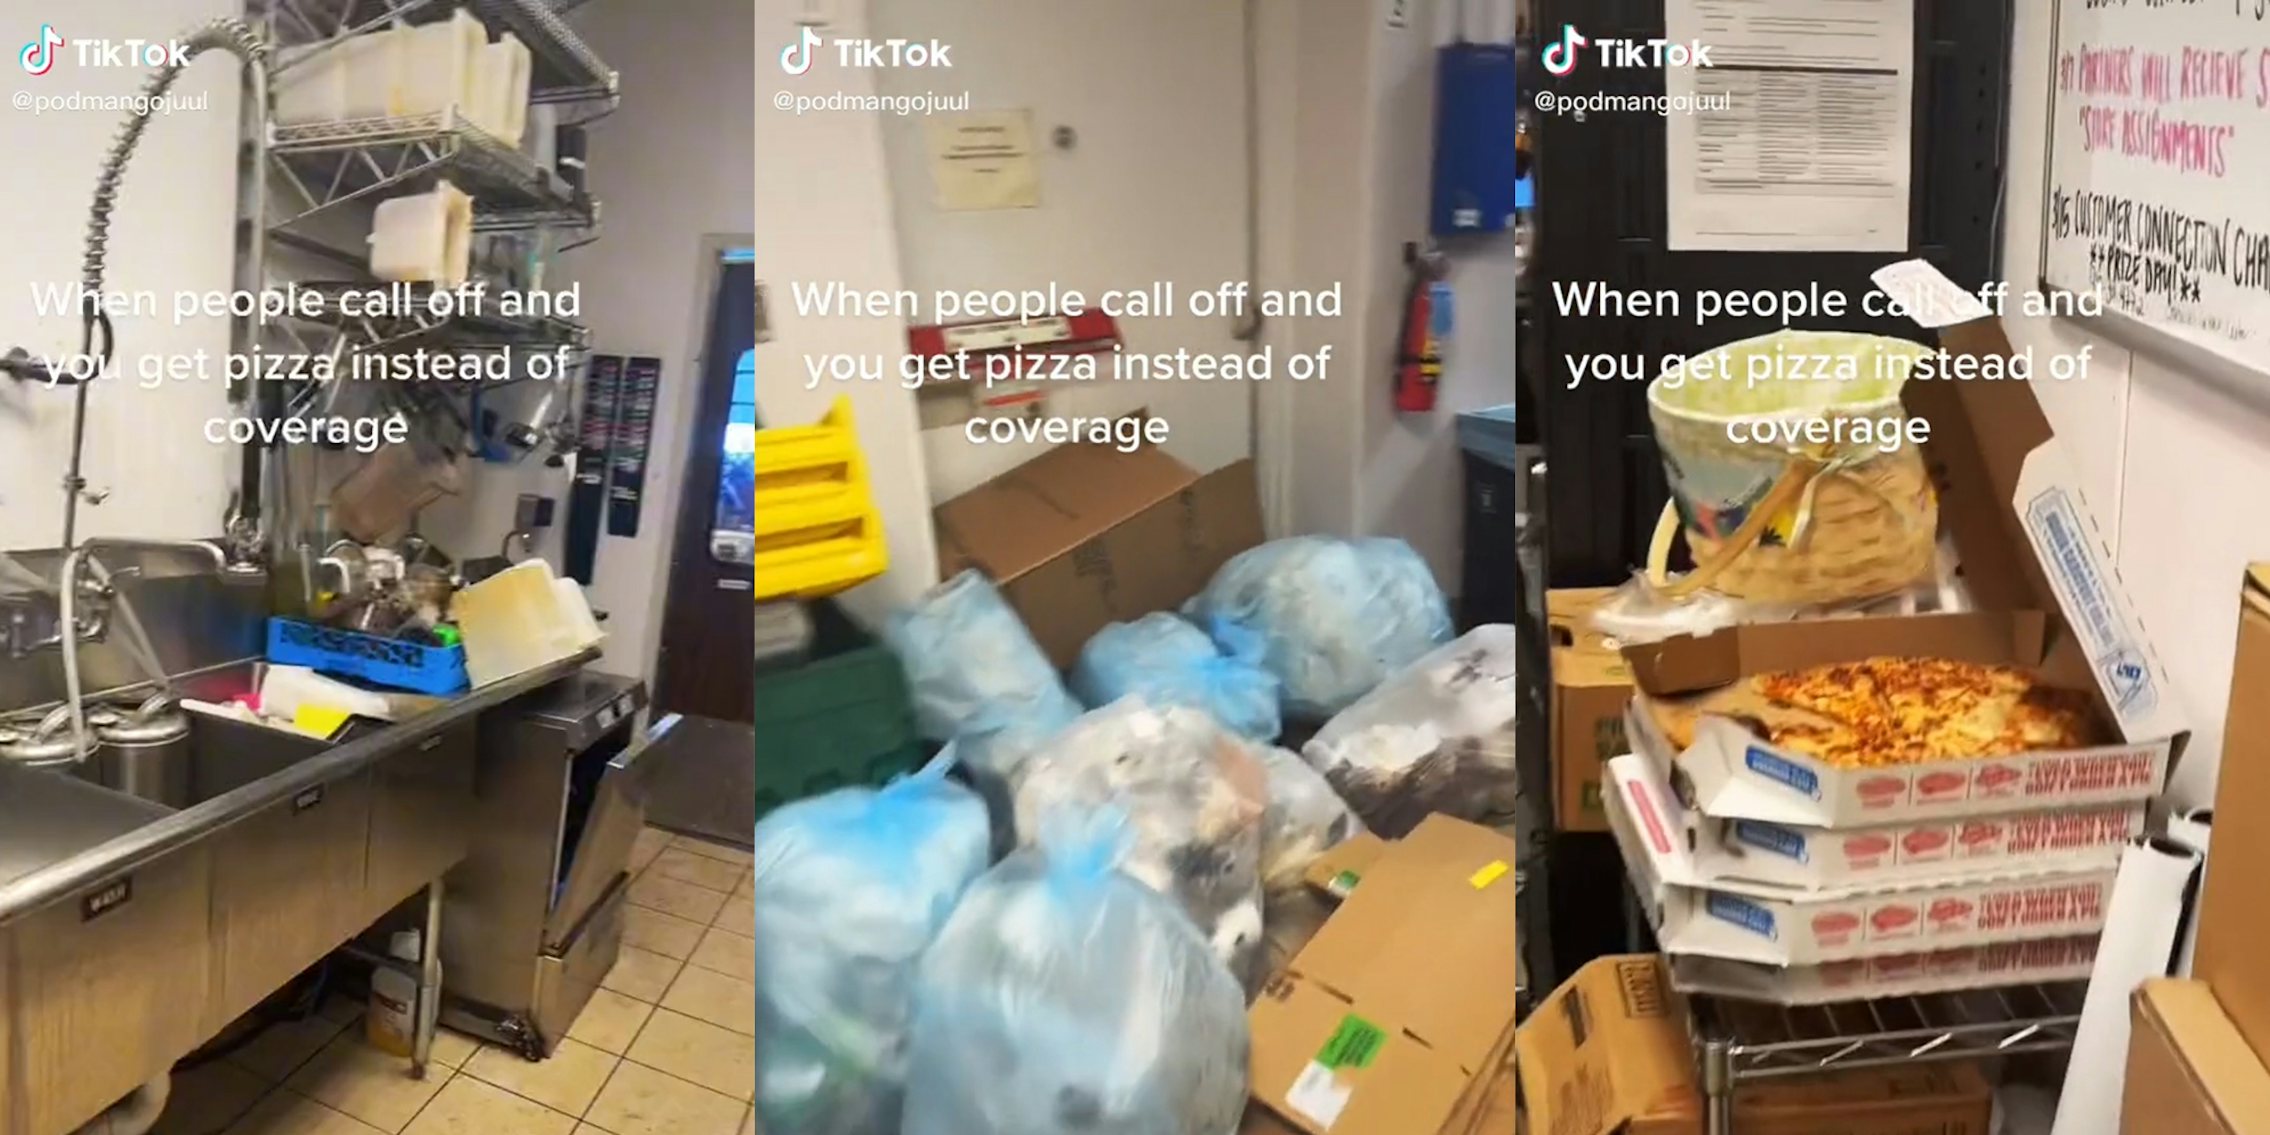 dirty back line (l) garbage bags at door (c) pizzas stacked on table (r) all with caption 'When people call off and you get pizza instead of coverage'